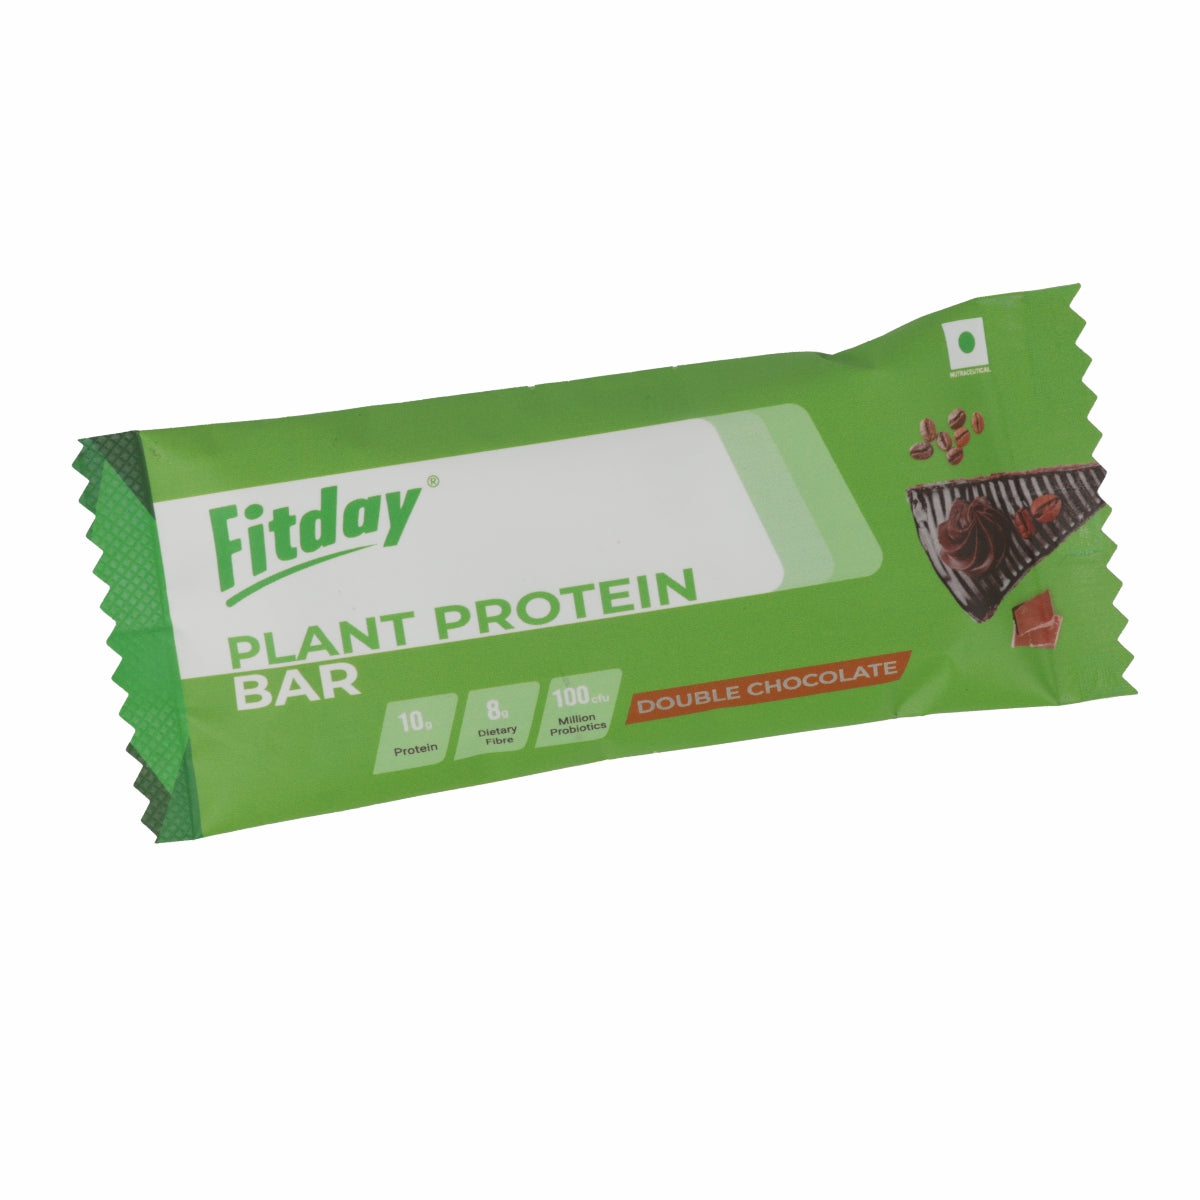 Fitday Plant Protein Bar - Double Chocolate